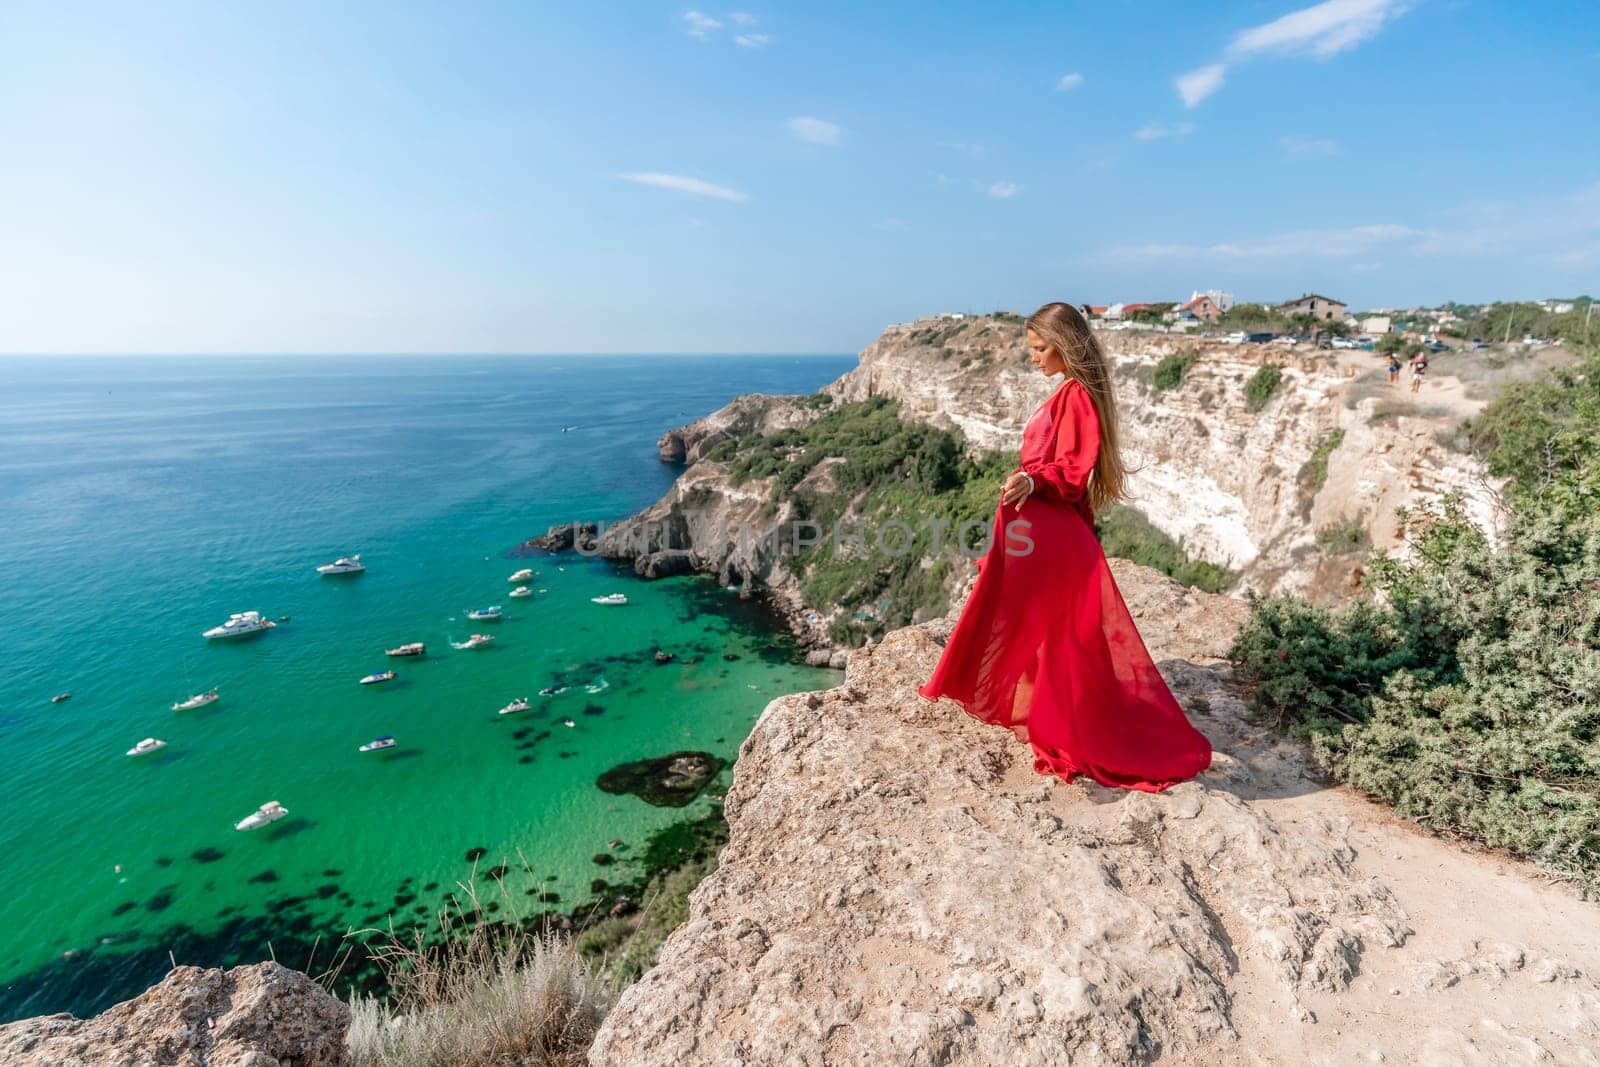 Red Dress Woman sea Cliff. A beautiful woman in a red dress and white swimsuit poses on a cliff overlooking the sea on a sunny day. Boats and yachts dot the background. by Matiunina